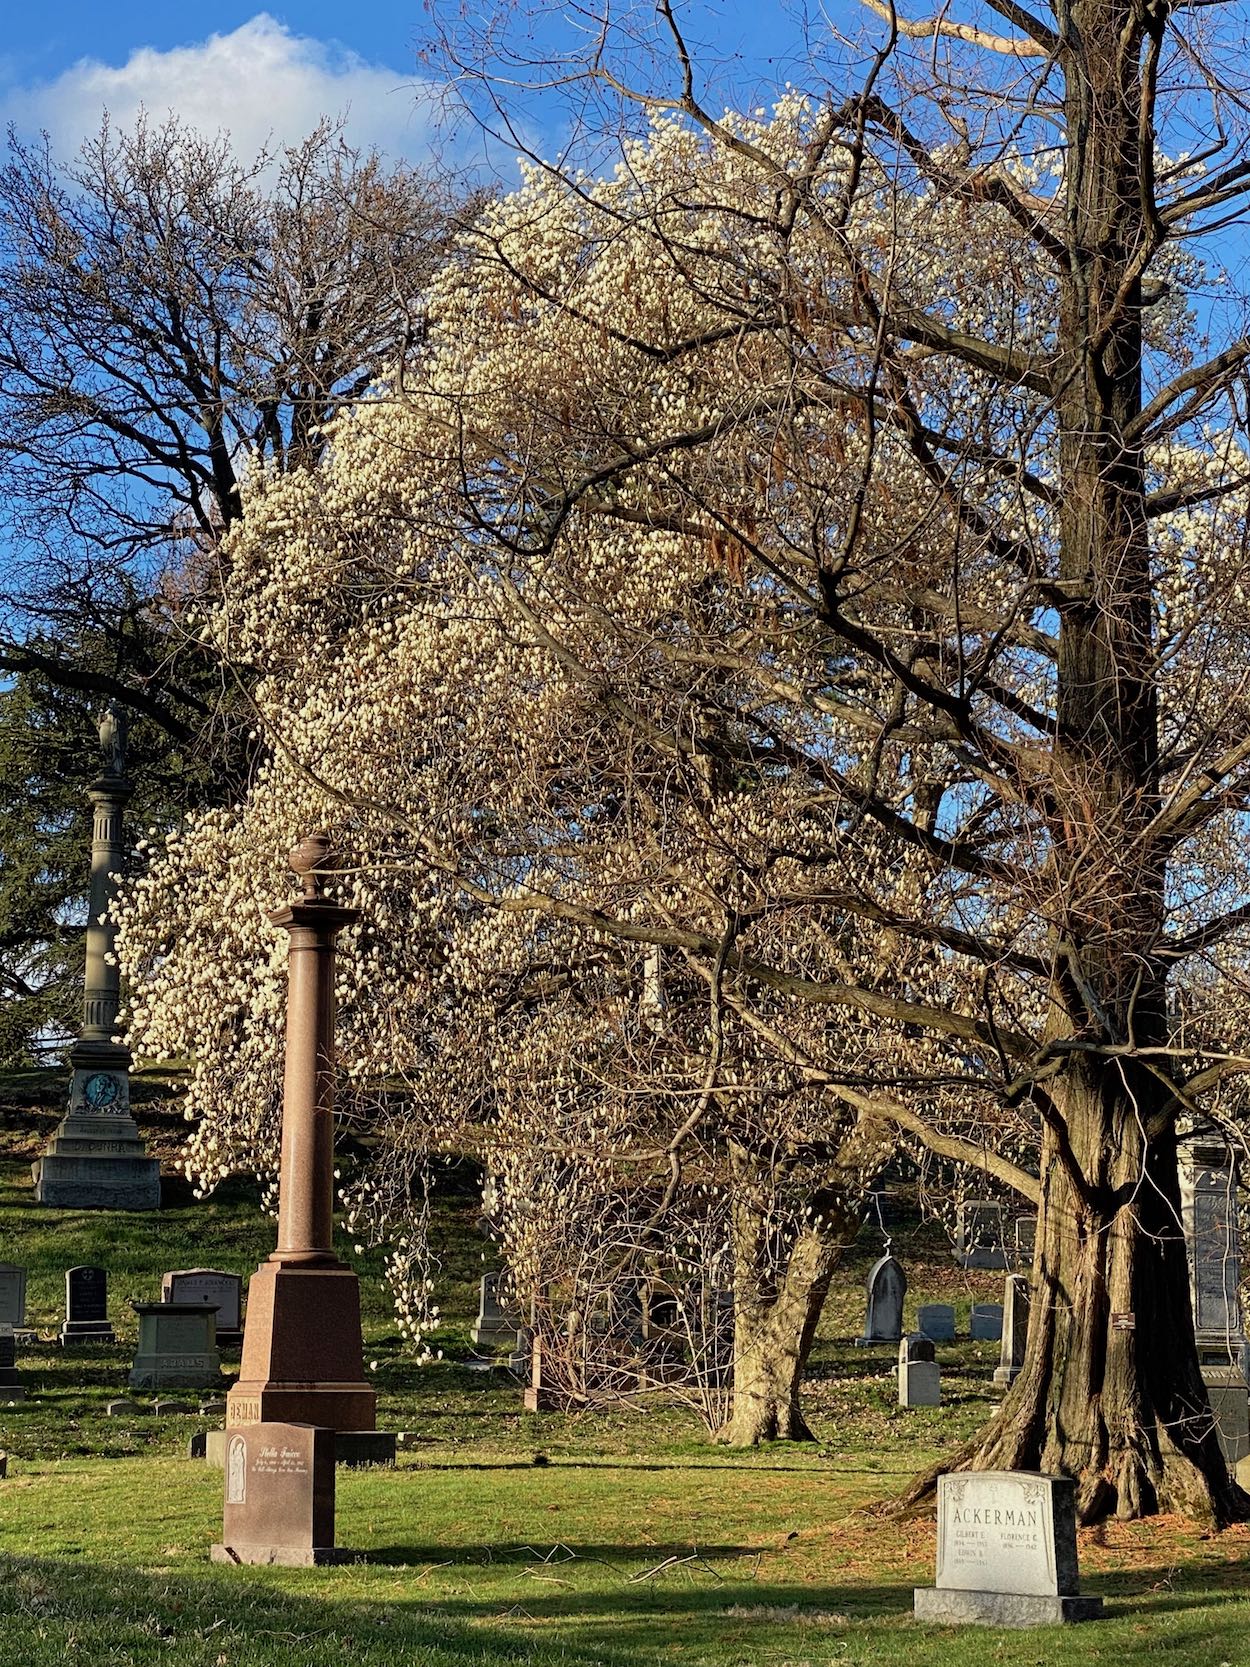 White Flowering Tree in Green-Wood Cemetery, Brooklyn NY